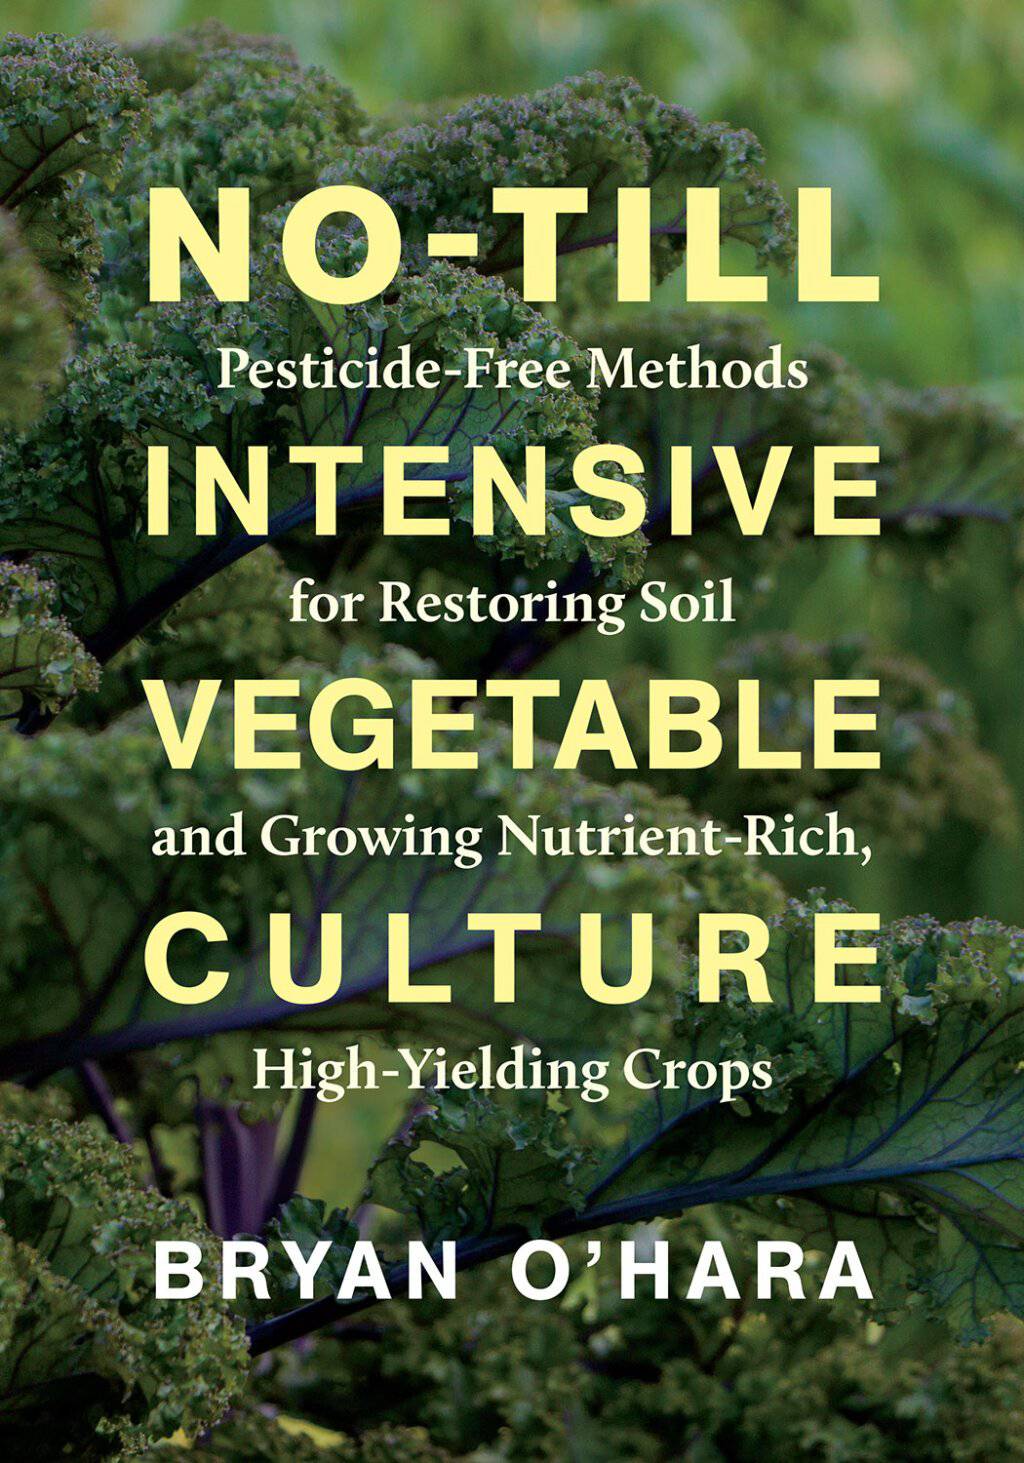 No-Till Intensive Vegetable Culture Pesticide-Free Methods for Restoring Soil and Growing Nutrient-Rich, High-Yielding Crops by Bryan O'Hara - The Josephine Porter Institute